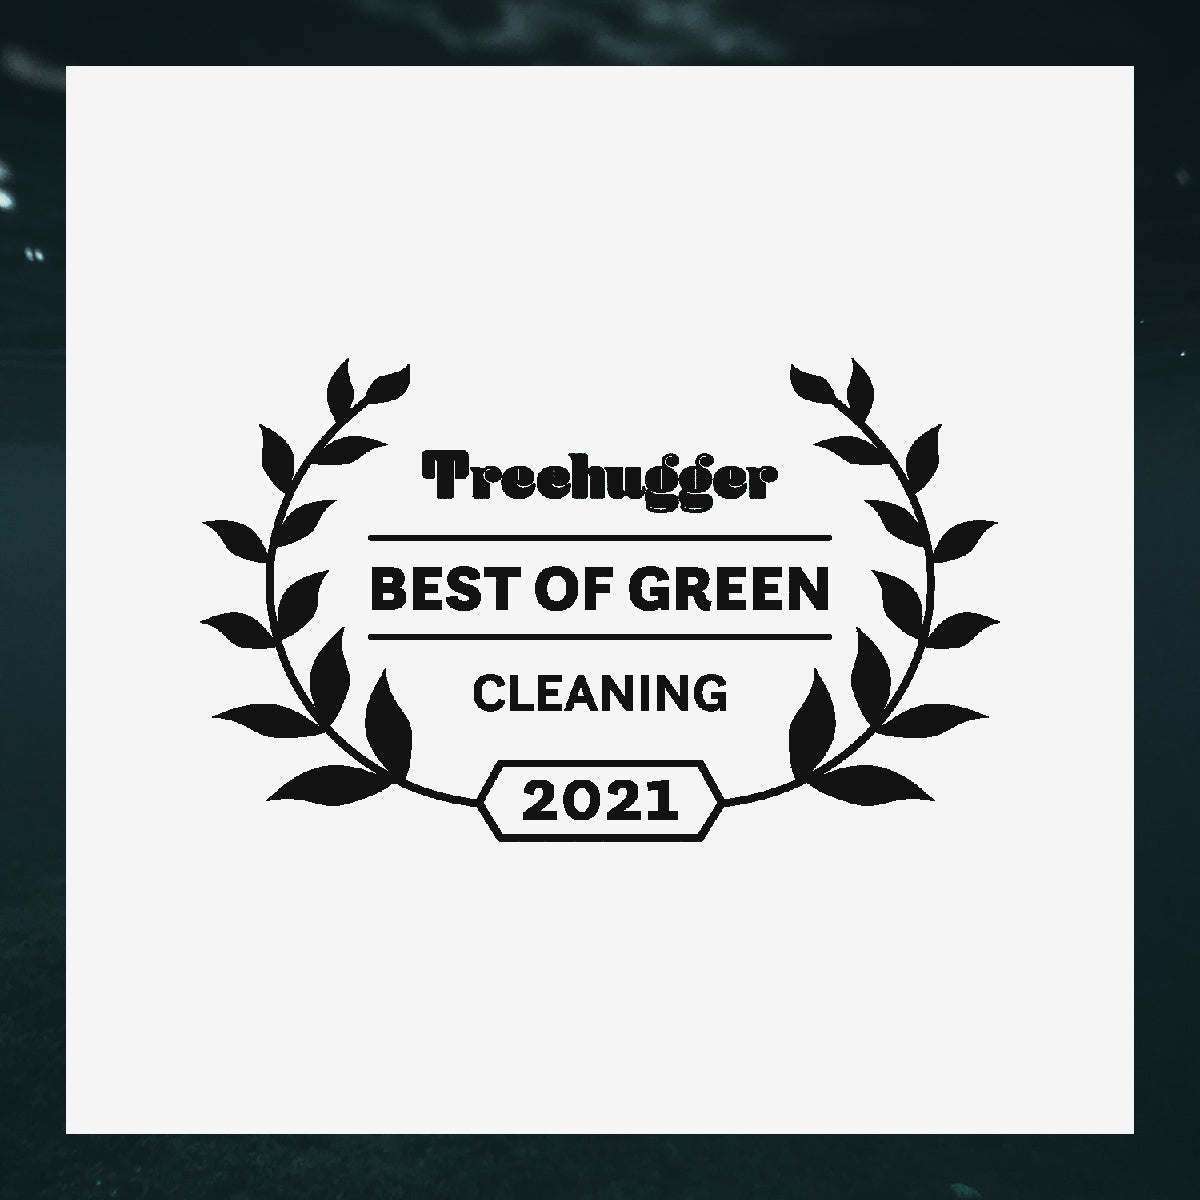 Sqwishful is a winner of the 2021 Treehugger Green Cleaning Awards